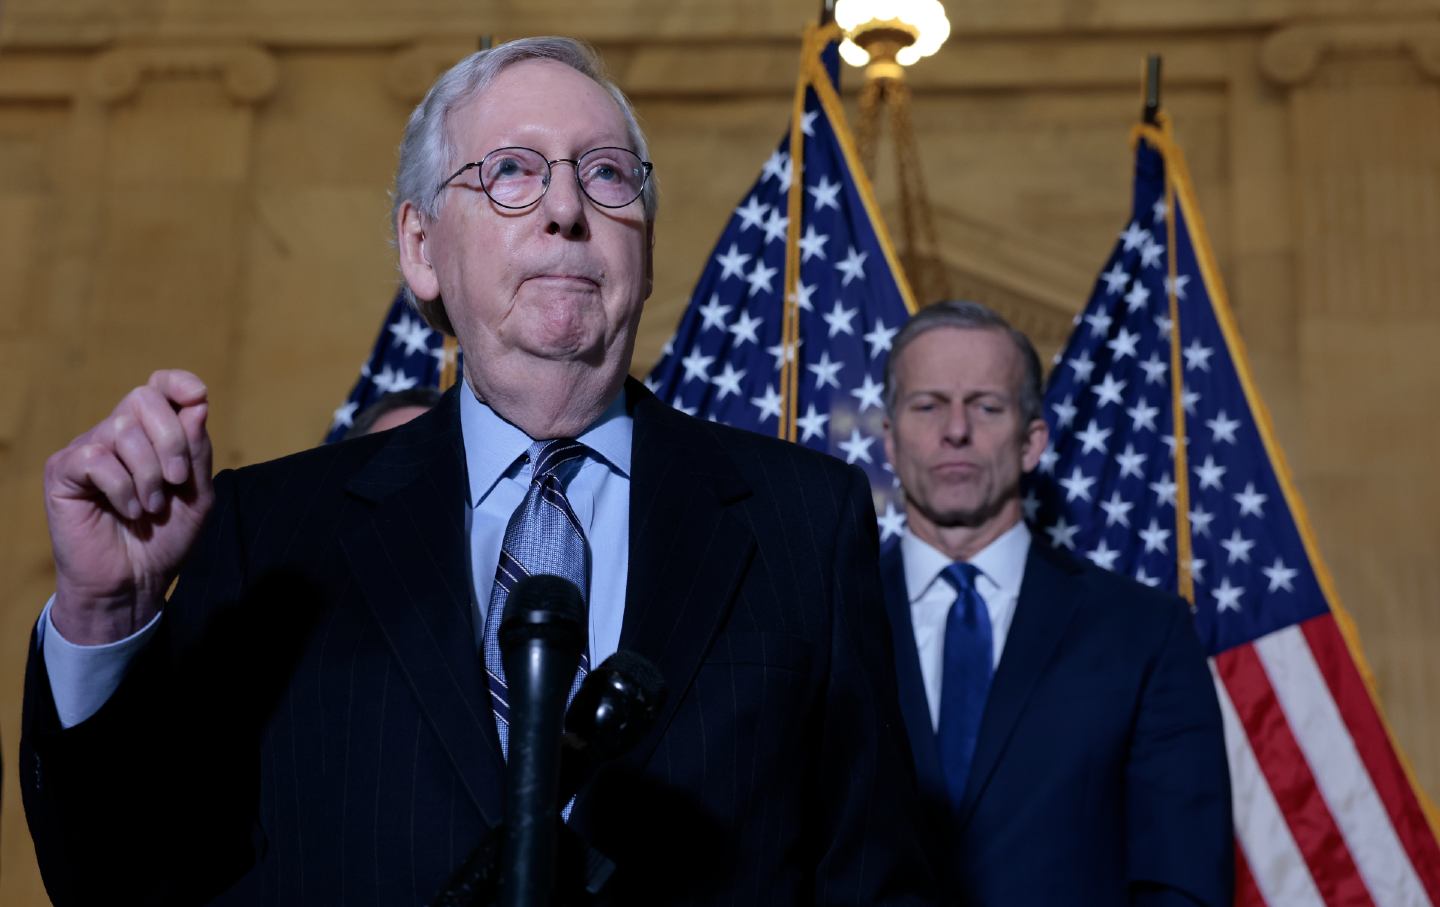 Mitch McConnell frog face